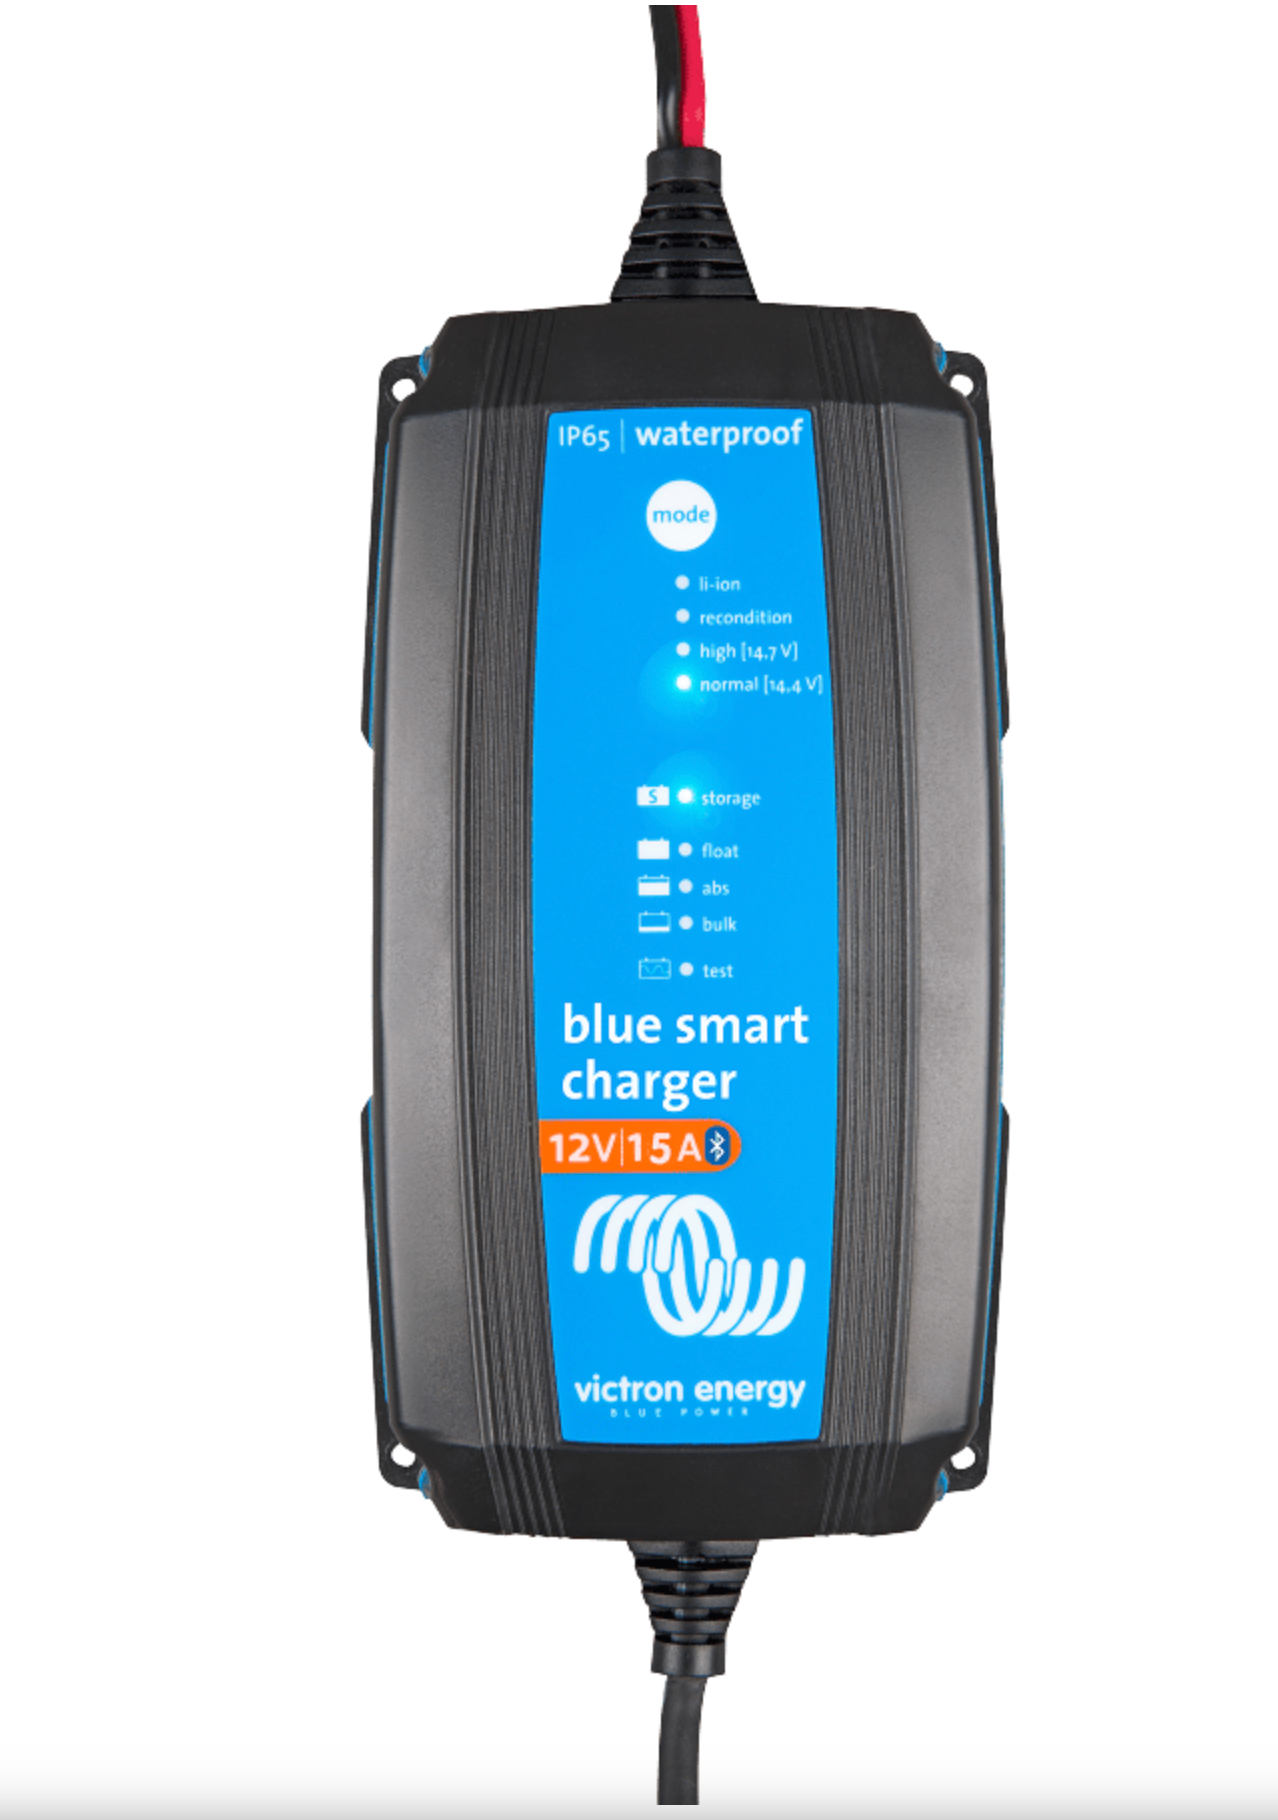 Blue Smart IP 65 Waterproof Battery Charger 12/15 (1) with Bluetooth by Victron Energy